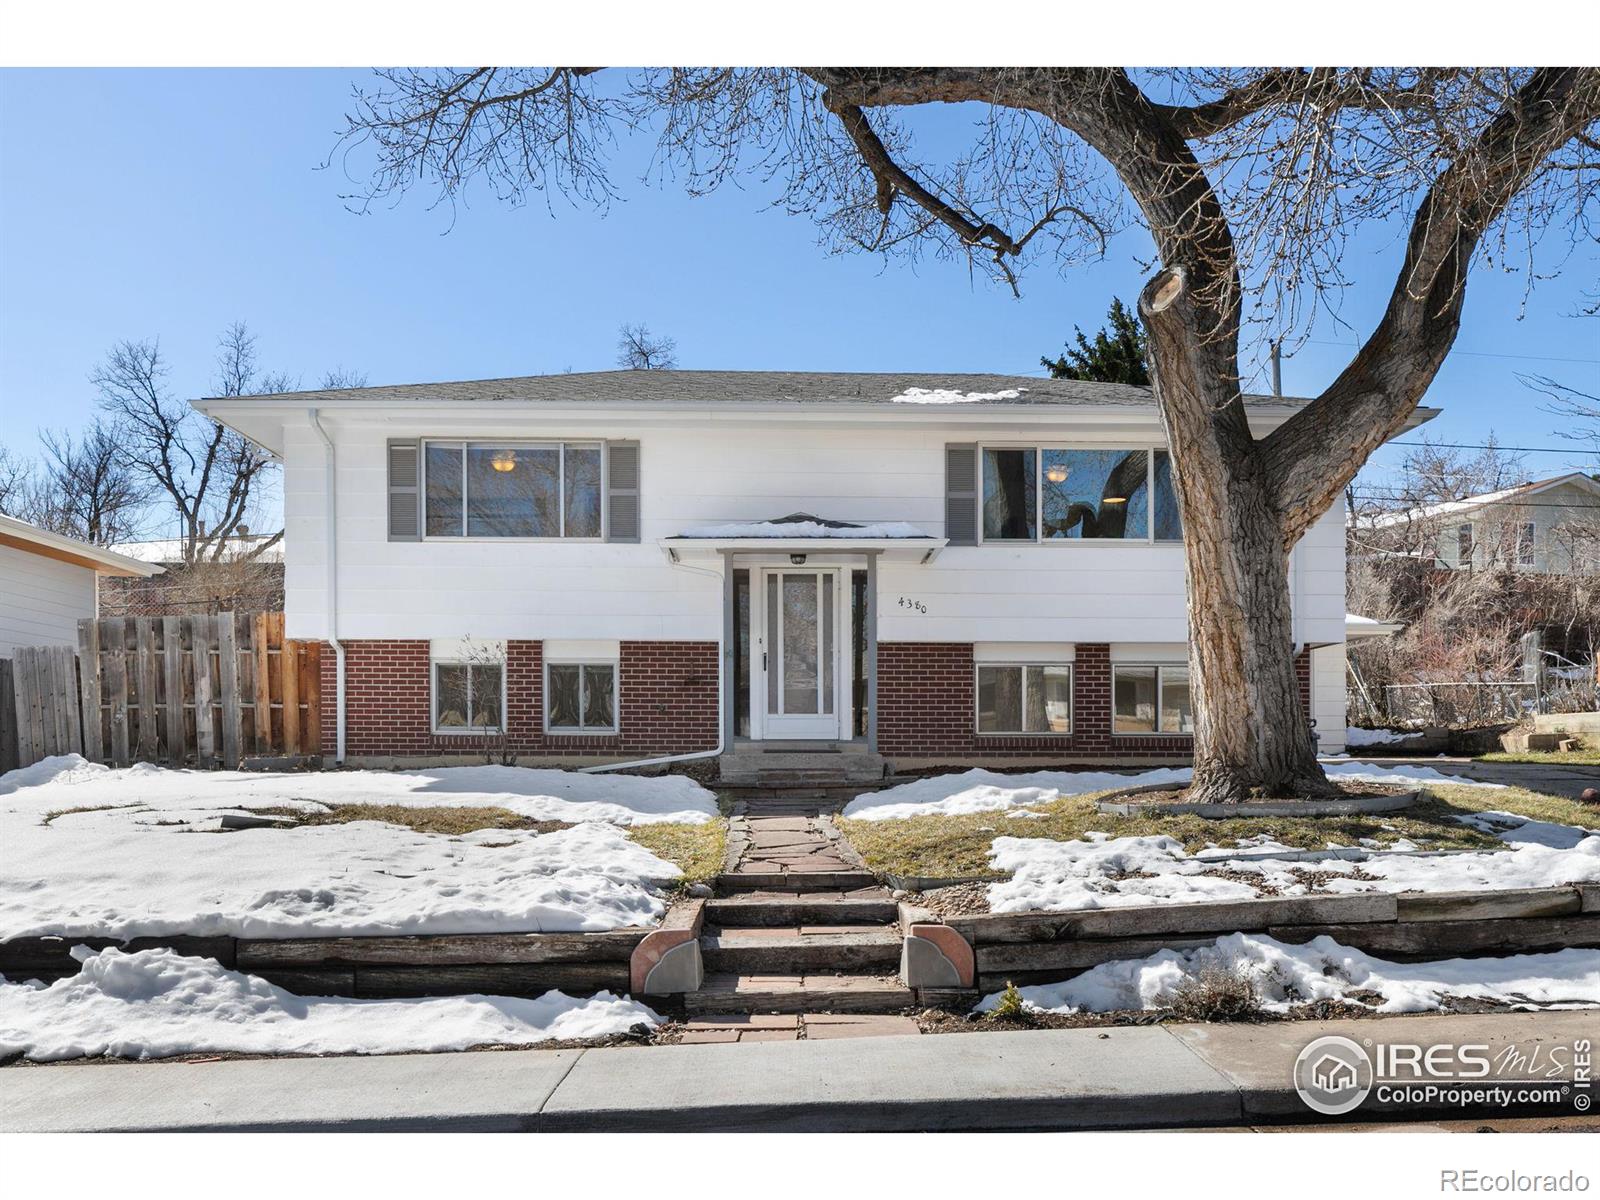 4380  Whitney Place, boulder MLS: 4567891005468 Beds: 4 Baths: 2 Price: $995,000